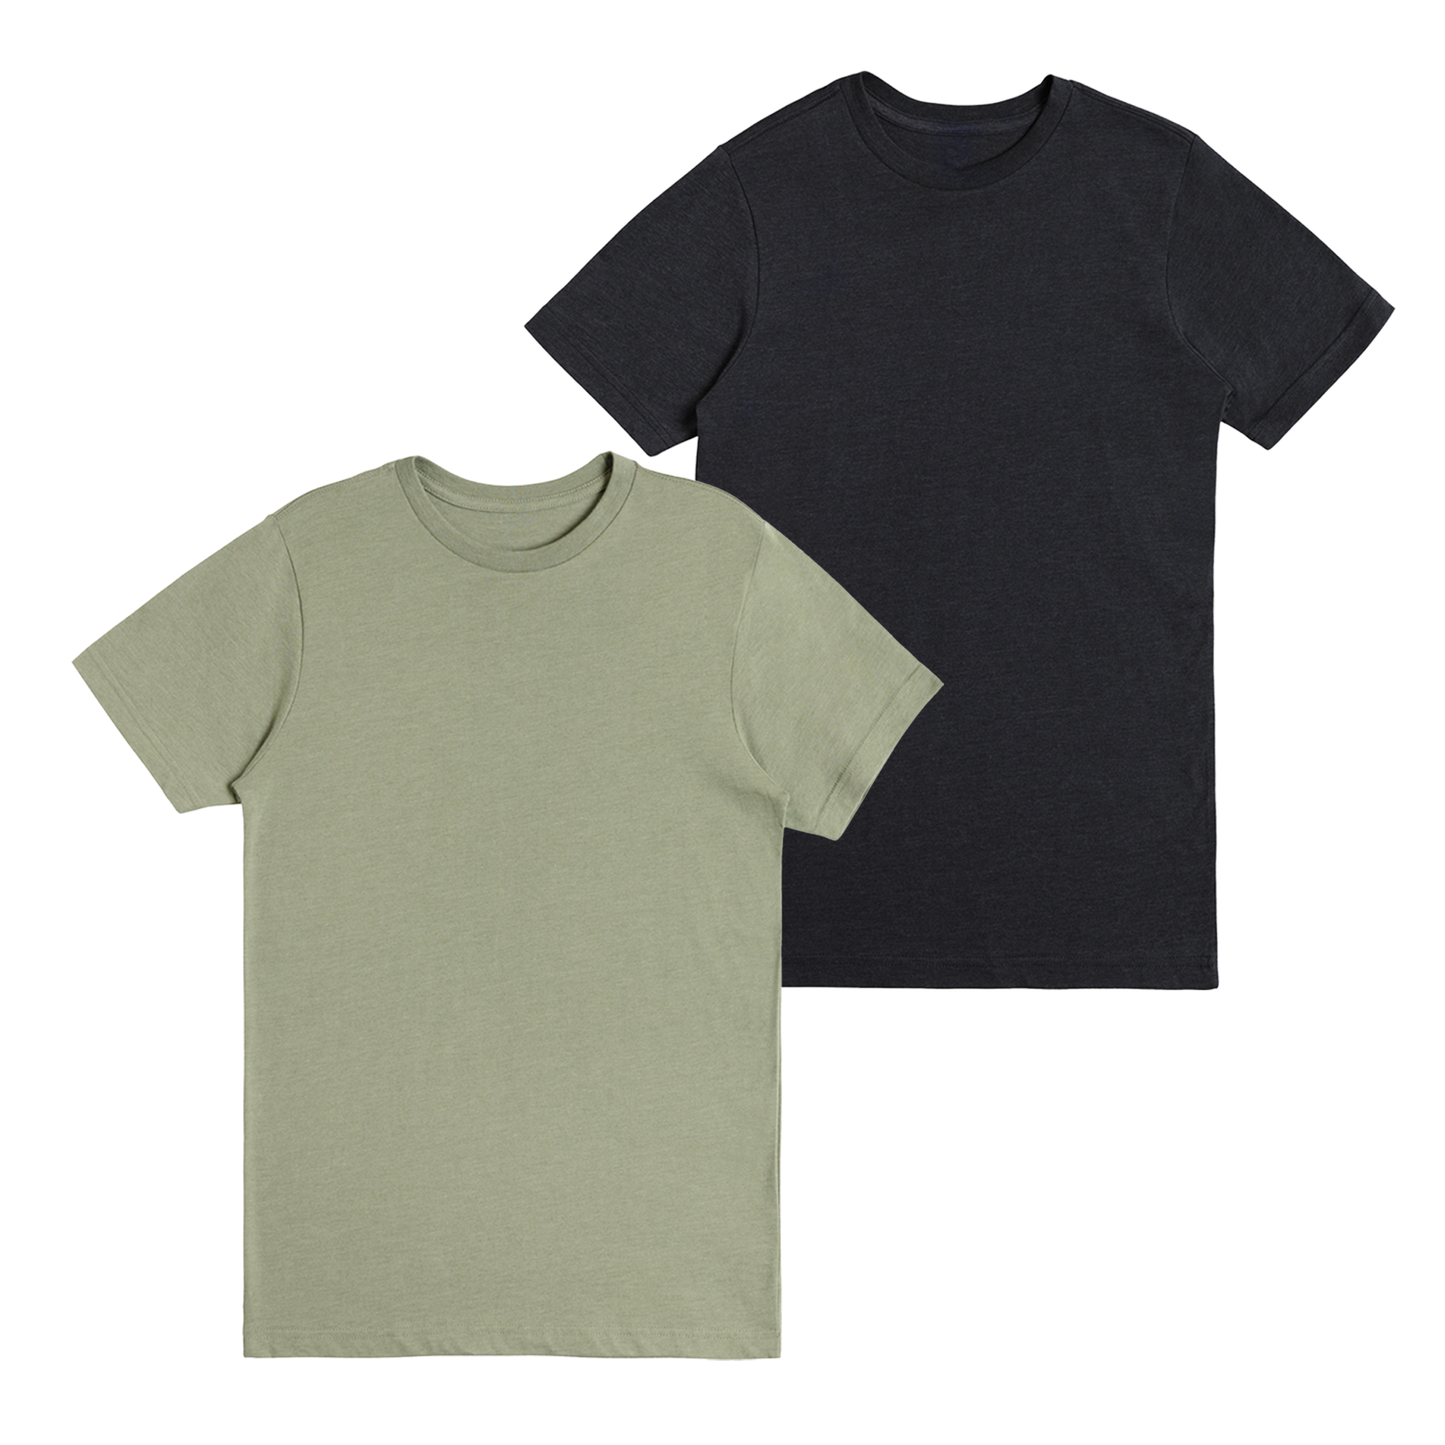 Soft Heather Tees 2-Pack "Olive" and "Black"